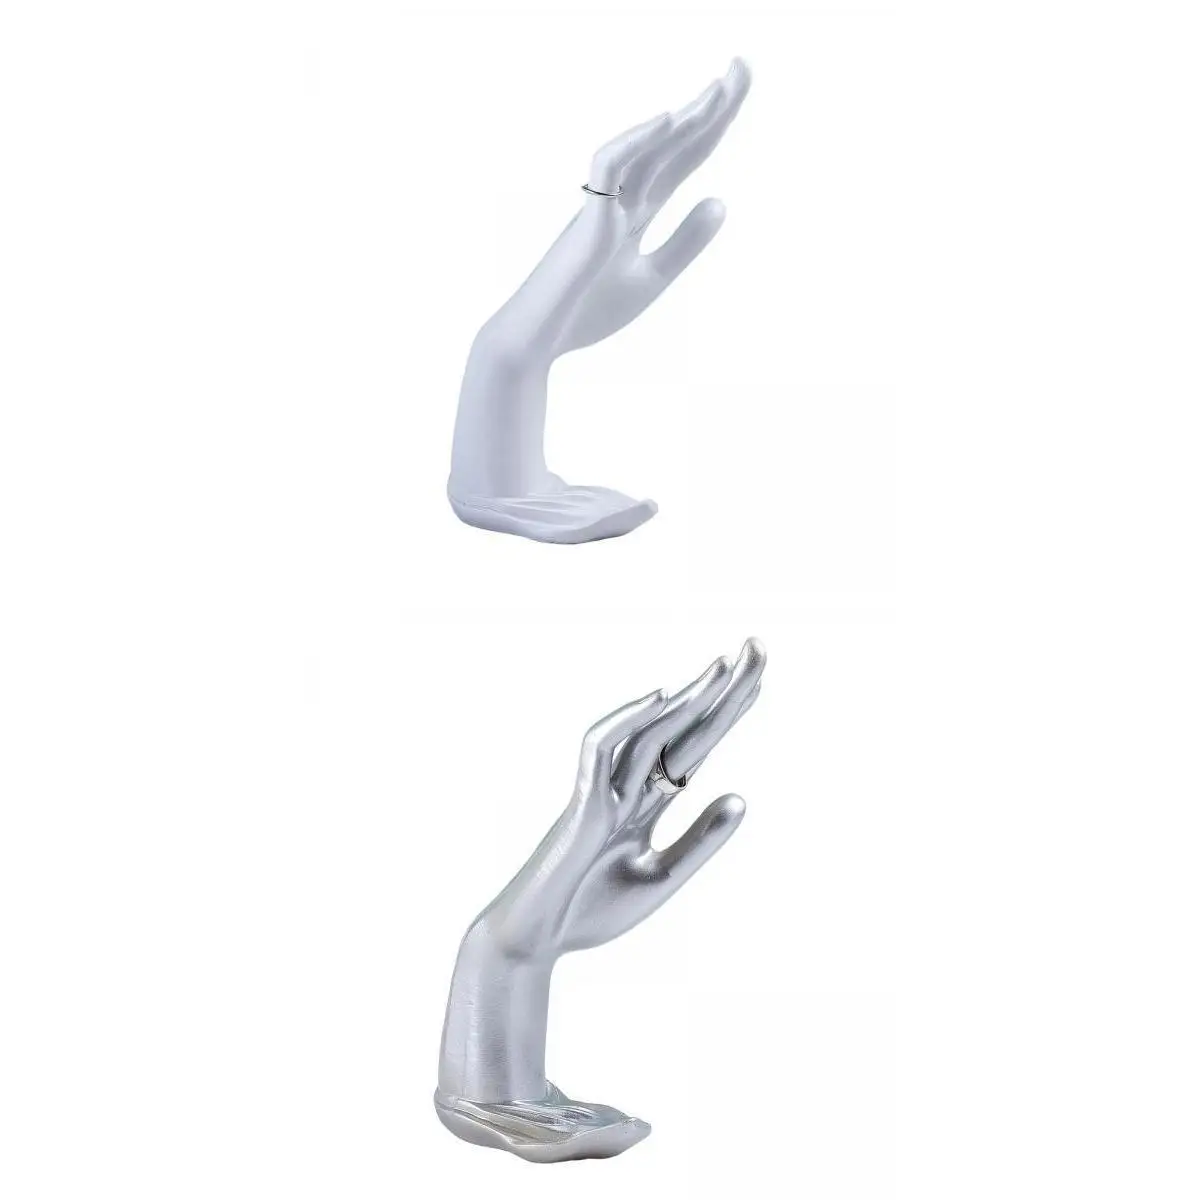 2 Pieces Rings Hand Holder Mannequin Hand Jewelry Organizer Home Decoration